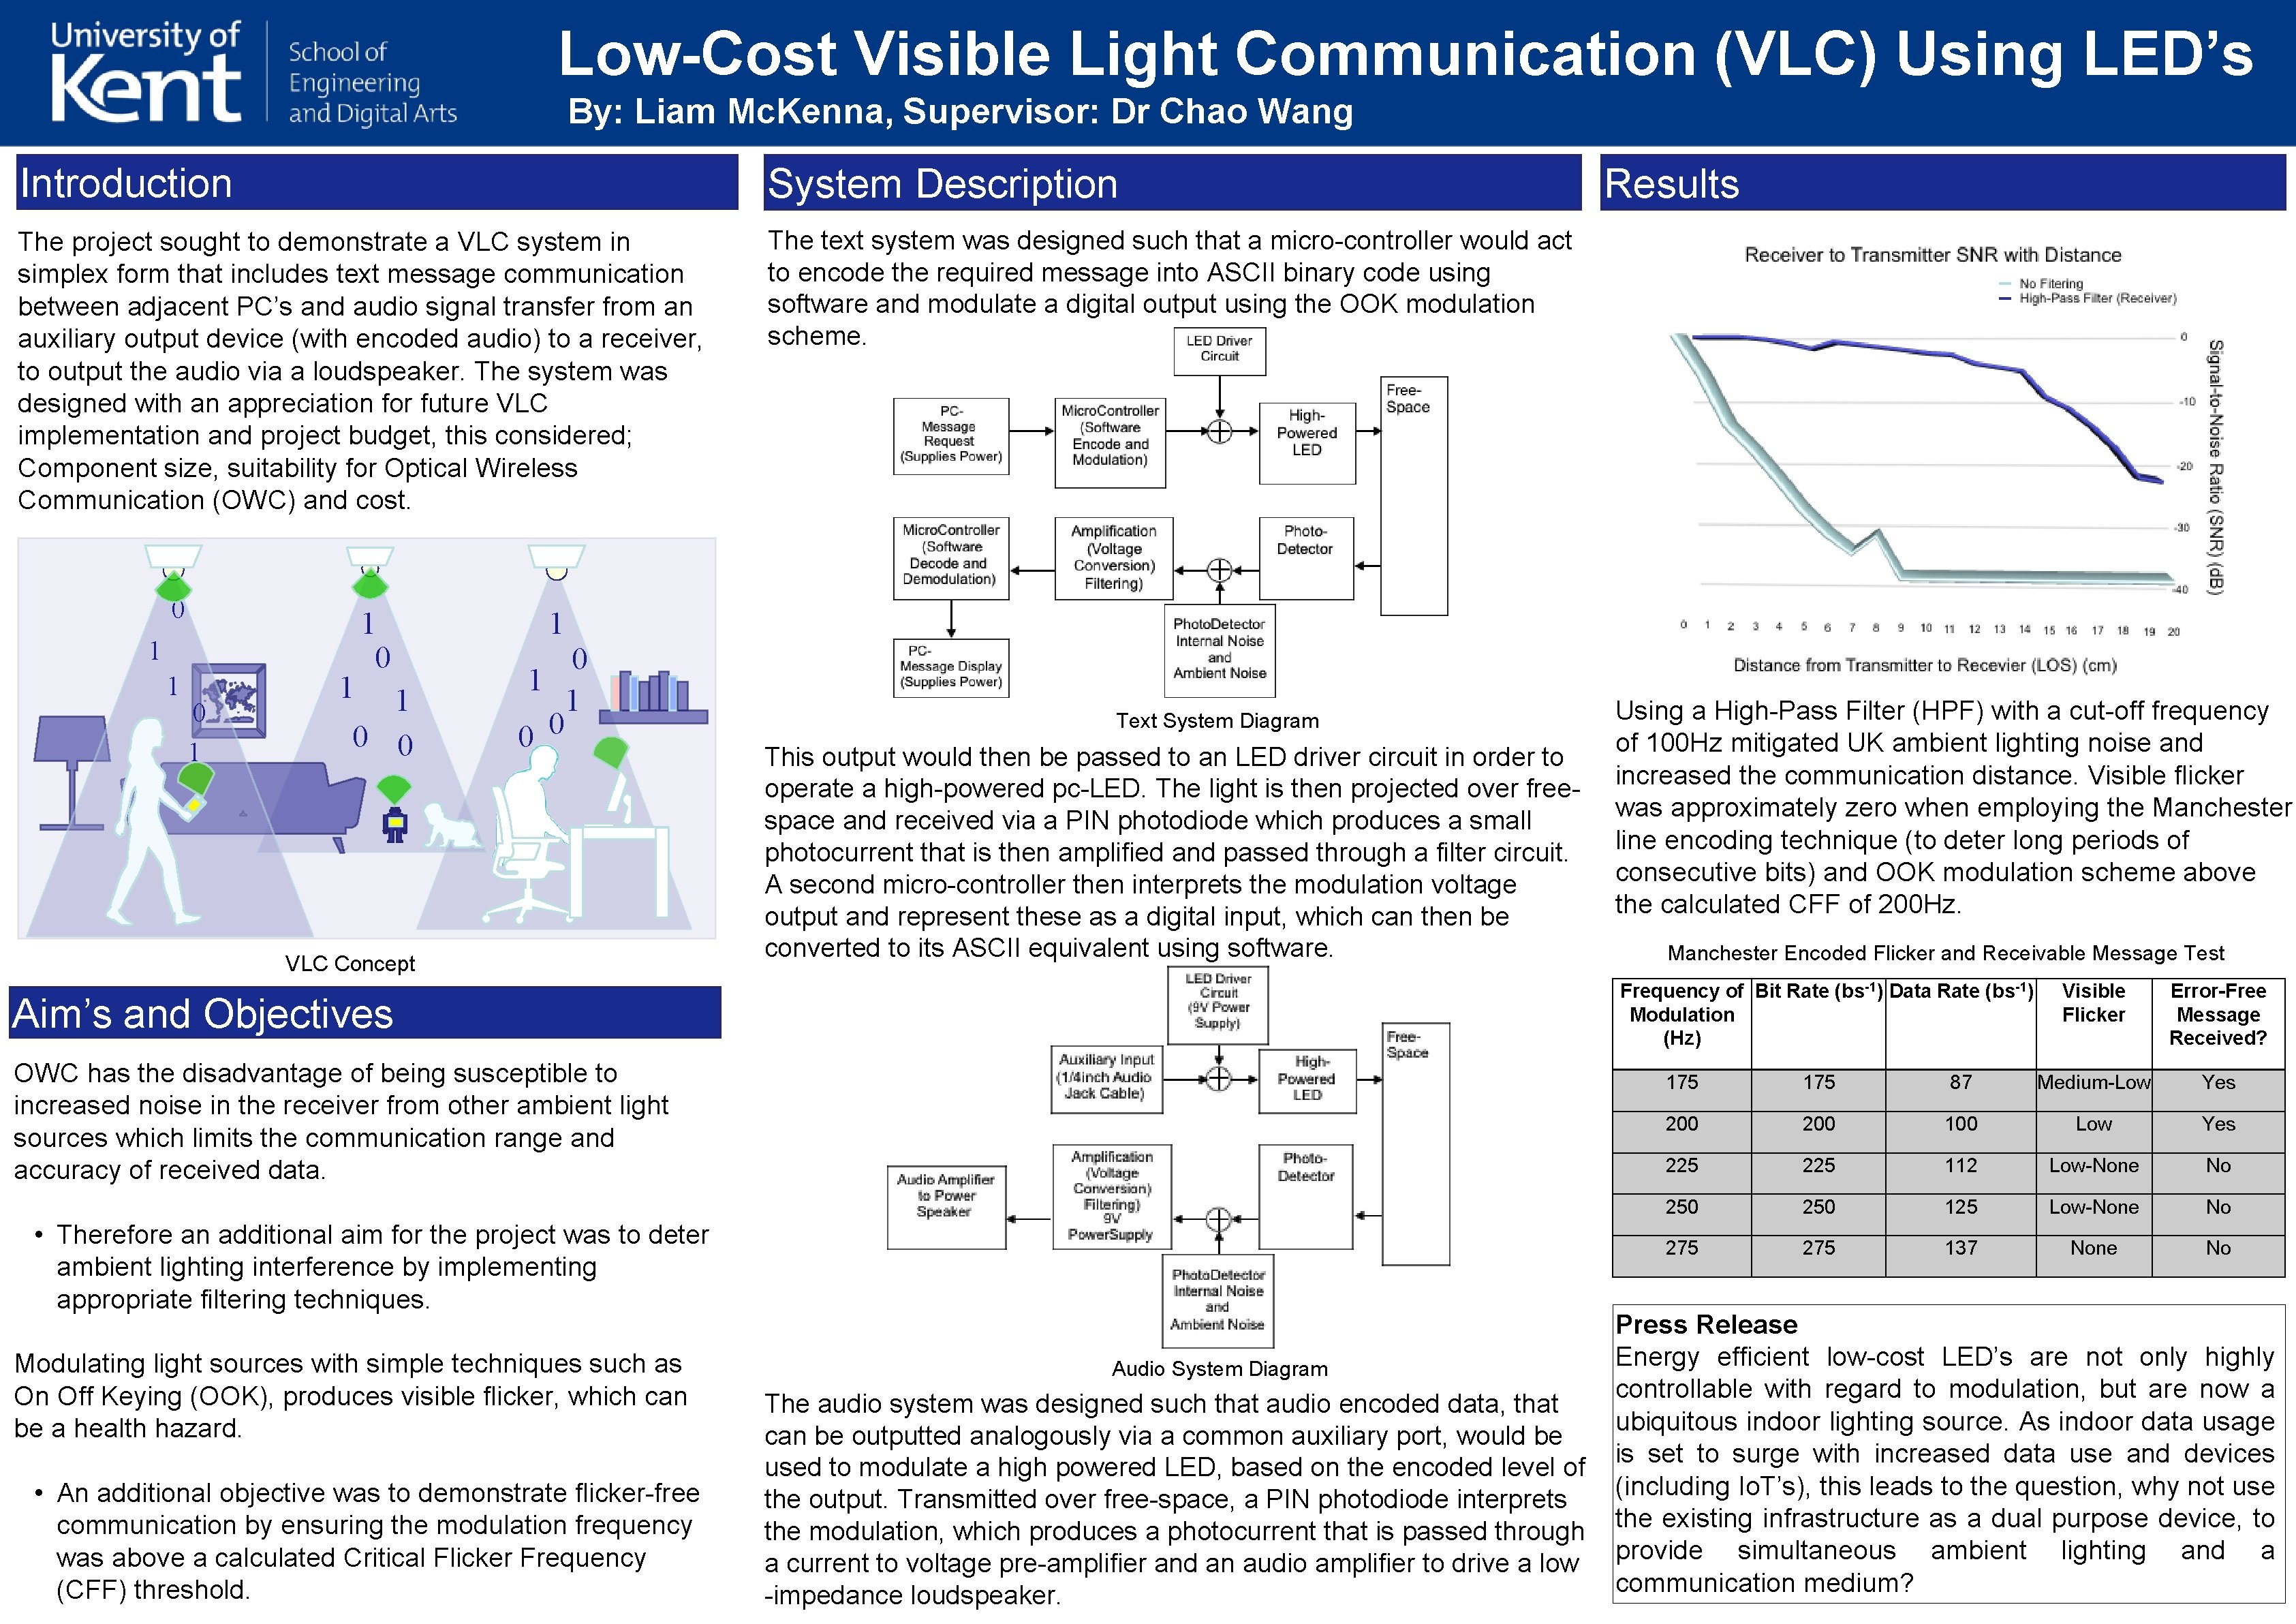 Low-Cost Visible Light Communication (VLC) Using LED’s By: Liam Mc. Kenna, Supervisor: Dr Chao